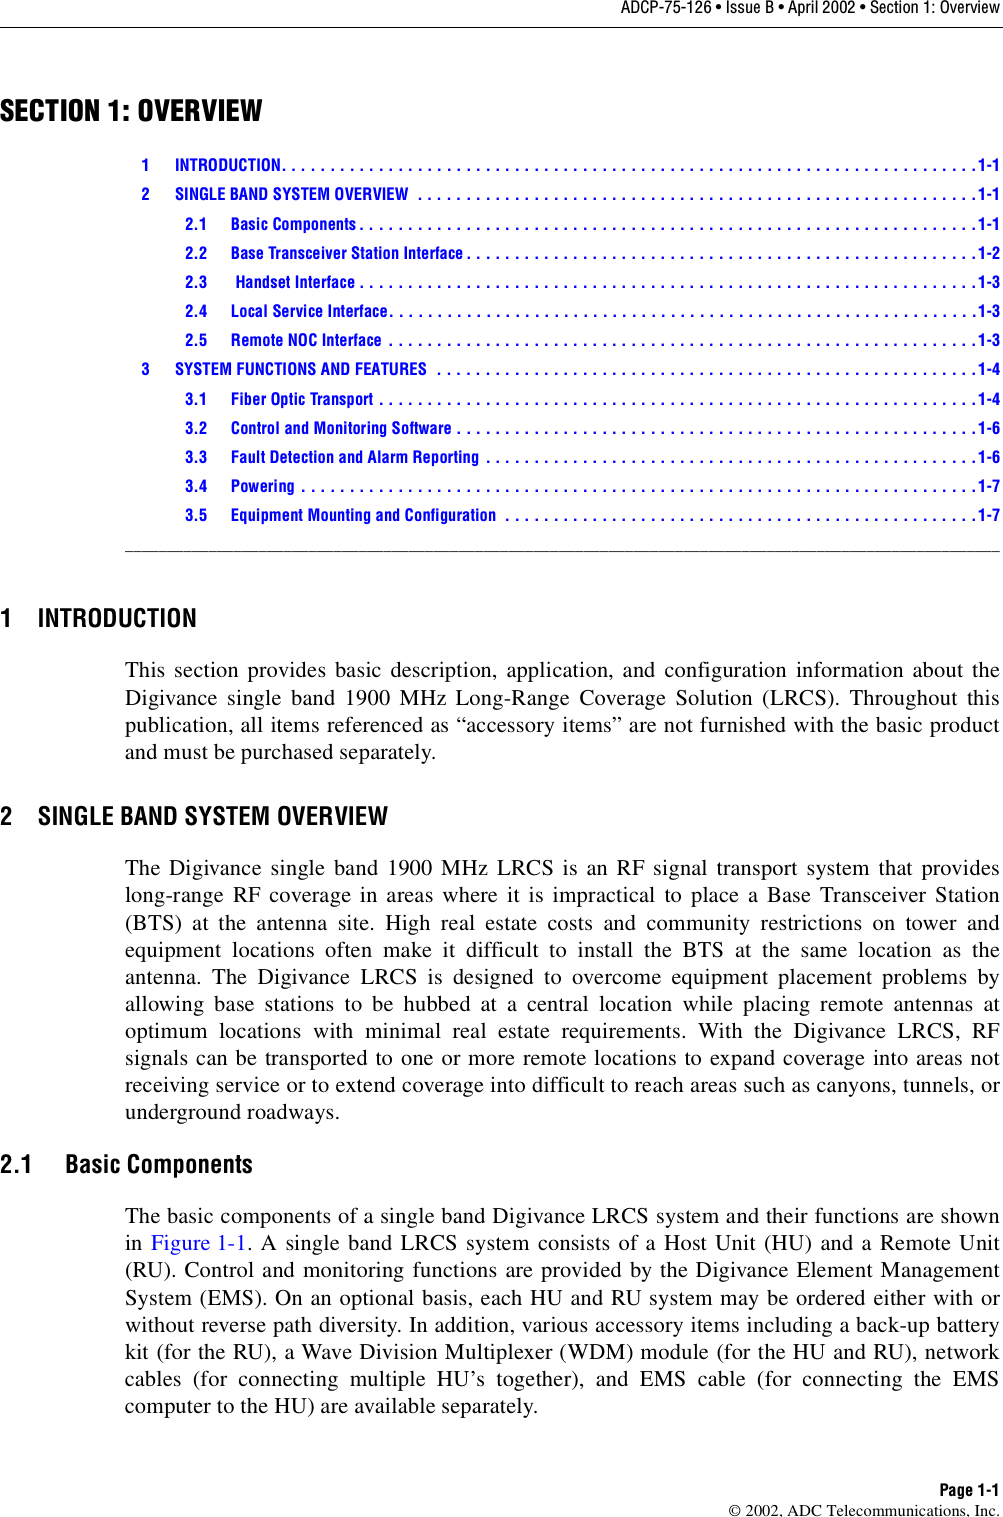 ADCP-75-126 • Issue B • April 2002 • Section 1: OverviewPage 1-1©2002, ADC Telecommunications, Inc.SECTION 1: OVERVIEW1 INTRODUCTION. . . . . . . . . . . . . . . . . . . . . . . . . . . . . . . . . . . . . . . . . . . . . . . . . . . . . . . . . . . . . . . . . . . . . . . . 1-12 SINGLE BAND SYSTEM OVERVIEW  . . . . . . . . . . . . . . . . . . . . . . . . . . . . . . . . . . . . . . . . . . . . . . . . . . . . . . . . . .1-12.1 Basic Components . . . . . . . . . . . . . . . . . . . . . . . . . . . . . . . . . . . . . . . . . . . . . . . . . . . . . . . . . . . . . . . .1-12.2 Base Transceiver Station Interface . . . . . . . . . . . . . . . . . . . . . . . . . . . . . . . . . . . . . . . . . . . . . . . . . . . . .1-22.3  Handset Interface . . . . . . . . . . . . . . . . . . . . . . . . . . . . . . . . . . . . . . . . . . . . . . . . . . . . . . . . . . . . . . . .1-32.4 Local Service Interface. . . . . . . . . . . . . . . . . . . . . . . . . . . . . . . . . . . . . . . . . . . . . . . . . . . . . . . . . . . . .1-32.5 Remote NOC Interface . . . . . . . . . . . . . . . . . . . . . . . . . . . . . . . . . . . . . . . . . . . . . . . . . . . . . . . . . . . . .1-33 SYSTEM FUNCTIONS AND FEATURES  . . . . . . . . . . . . . . . . . . . . . . . . . . . . . . . . . . . . . . . . . . . . . . . . . . . . . . . .1-43.1 Fiber Optic Transport . . . . . . . . . . . . . . . . . . . . . . . . . . . . . . . . . . . . . . . . . . . . . . . . . . . . . . . . . . . . . . 1-43.2 Control and Monitoring Software . . . . . . . . . . . . . . . . . . . . . . . . . . . . . . . . . . . . . . . . . . . . . . . . . . . . . .1-63.3 Fault Detection and Alarm Reporting . . . . . . . . . . . . . . . . . . . . . . . . . . . . . . . . . . . . . . . . . . . . . . . . . . .1-63.4 Powering . . . . . . . . . . . . . . . . . . . . . . . . . . . . . . . . . . . . . . . . . . . . . . . . . . . . . . . . . . . . . . . . . . . . . . 1-73.5 Equipment Mounting and Configuration  . . . . . . . . . . . . . . . . . . . . . . . . . . . . . . . . . . . . . . . . . . . . . . . . .1-7_________________________________________________________________________________________________________1 INTRODUCTIONThis section provides basic description, application, and configuration information about theDigivance single band 1900 MHz Long-Range Coverage Solution (LRCS). Throughout thispublication, all items referenced as “accessory items” are not furnished with the basic productand must be purchased separately.2 SINGLE BAND SYSTEM OVERVIEWThe Digivance single band 1900 MHz LRCS is an RF signal transport system that provideslong-range RF coverage in areas where it is impractical to place aBase Transceiver Station(BTS) at the antenna site. High real estate costs and community restrictions on tower andequipment locations often make it difficult to install the BTS at the same location as theantenna. The Digivance LRCS is designed to overcome equipment placement problems byallowing base stations to be hubbed at acentral location while placing remote antennas atoptimum locations with minimal real estate requirements. With the Digivance LRCS, RFsignals can be transported to one or more remote locations to expand coverage into areas notreceiving service or to extend coverage into difficult to reach areas such as canyons, tunnels, orunderground roadways.2.1 Basic ComponentsThe basic components of asingle band Digivance LRCS system and their functions are shownin Figure 1-1. A single band LRCS system consists of aHost Unit (HU) and aRemote Unit(RU). Control and monitoring functions are provided by the Digivance Element ManagementSystem (EMS). On an optional basis, each HU and RU system may be ordered either with orwithout reverse path diversity. In addition, various accessory items including aback-up batterykit (for the RU), aWave Division Multiplexer (WDM) module (for the HU and RU), networkcables (for connecting multiple HU’s together), and EMS cable (for connecting the EMScomputer to the HU) are available separately.